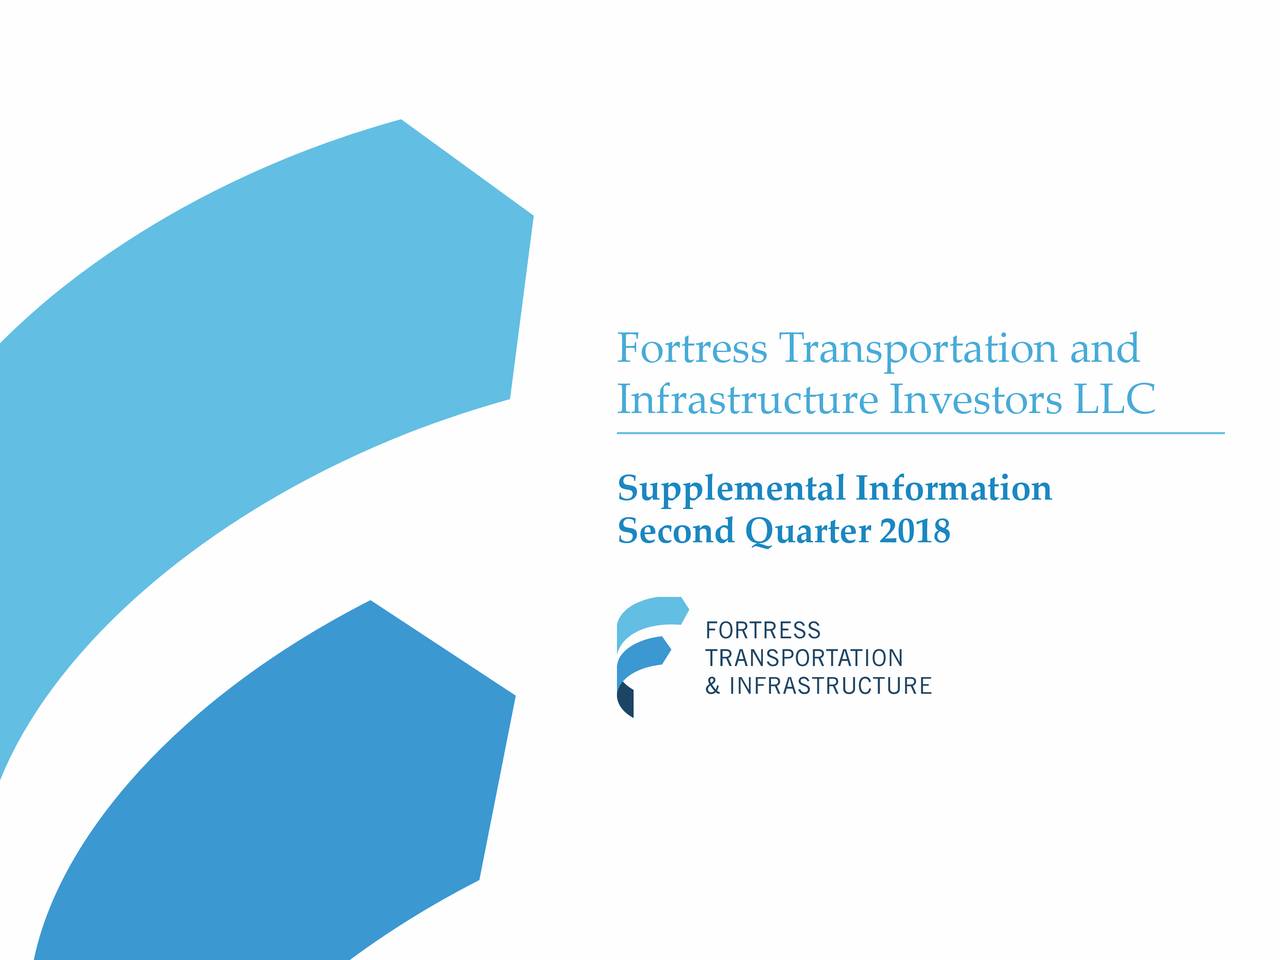 Fortress Transportation and